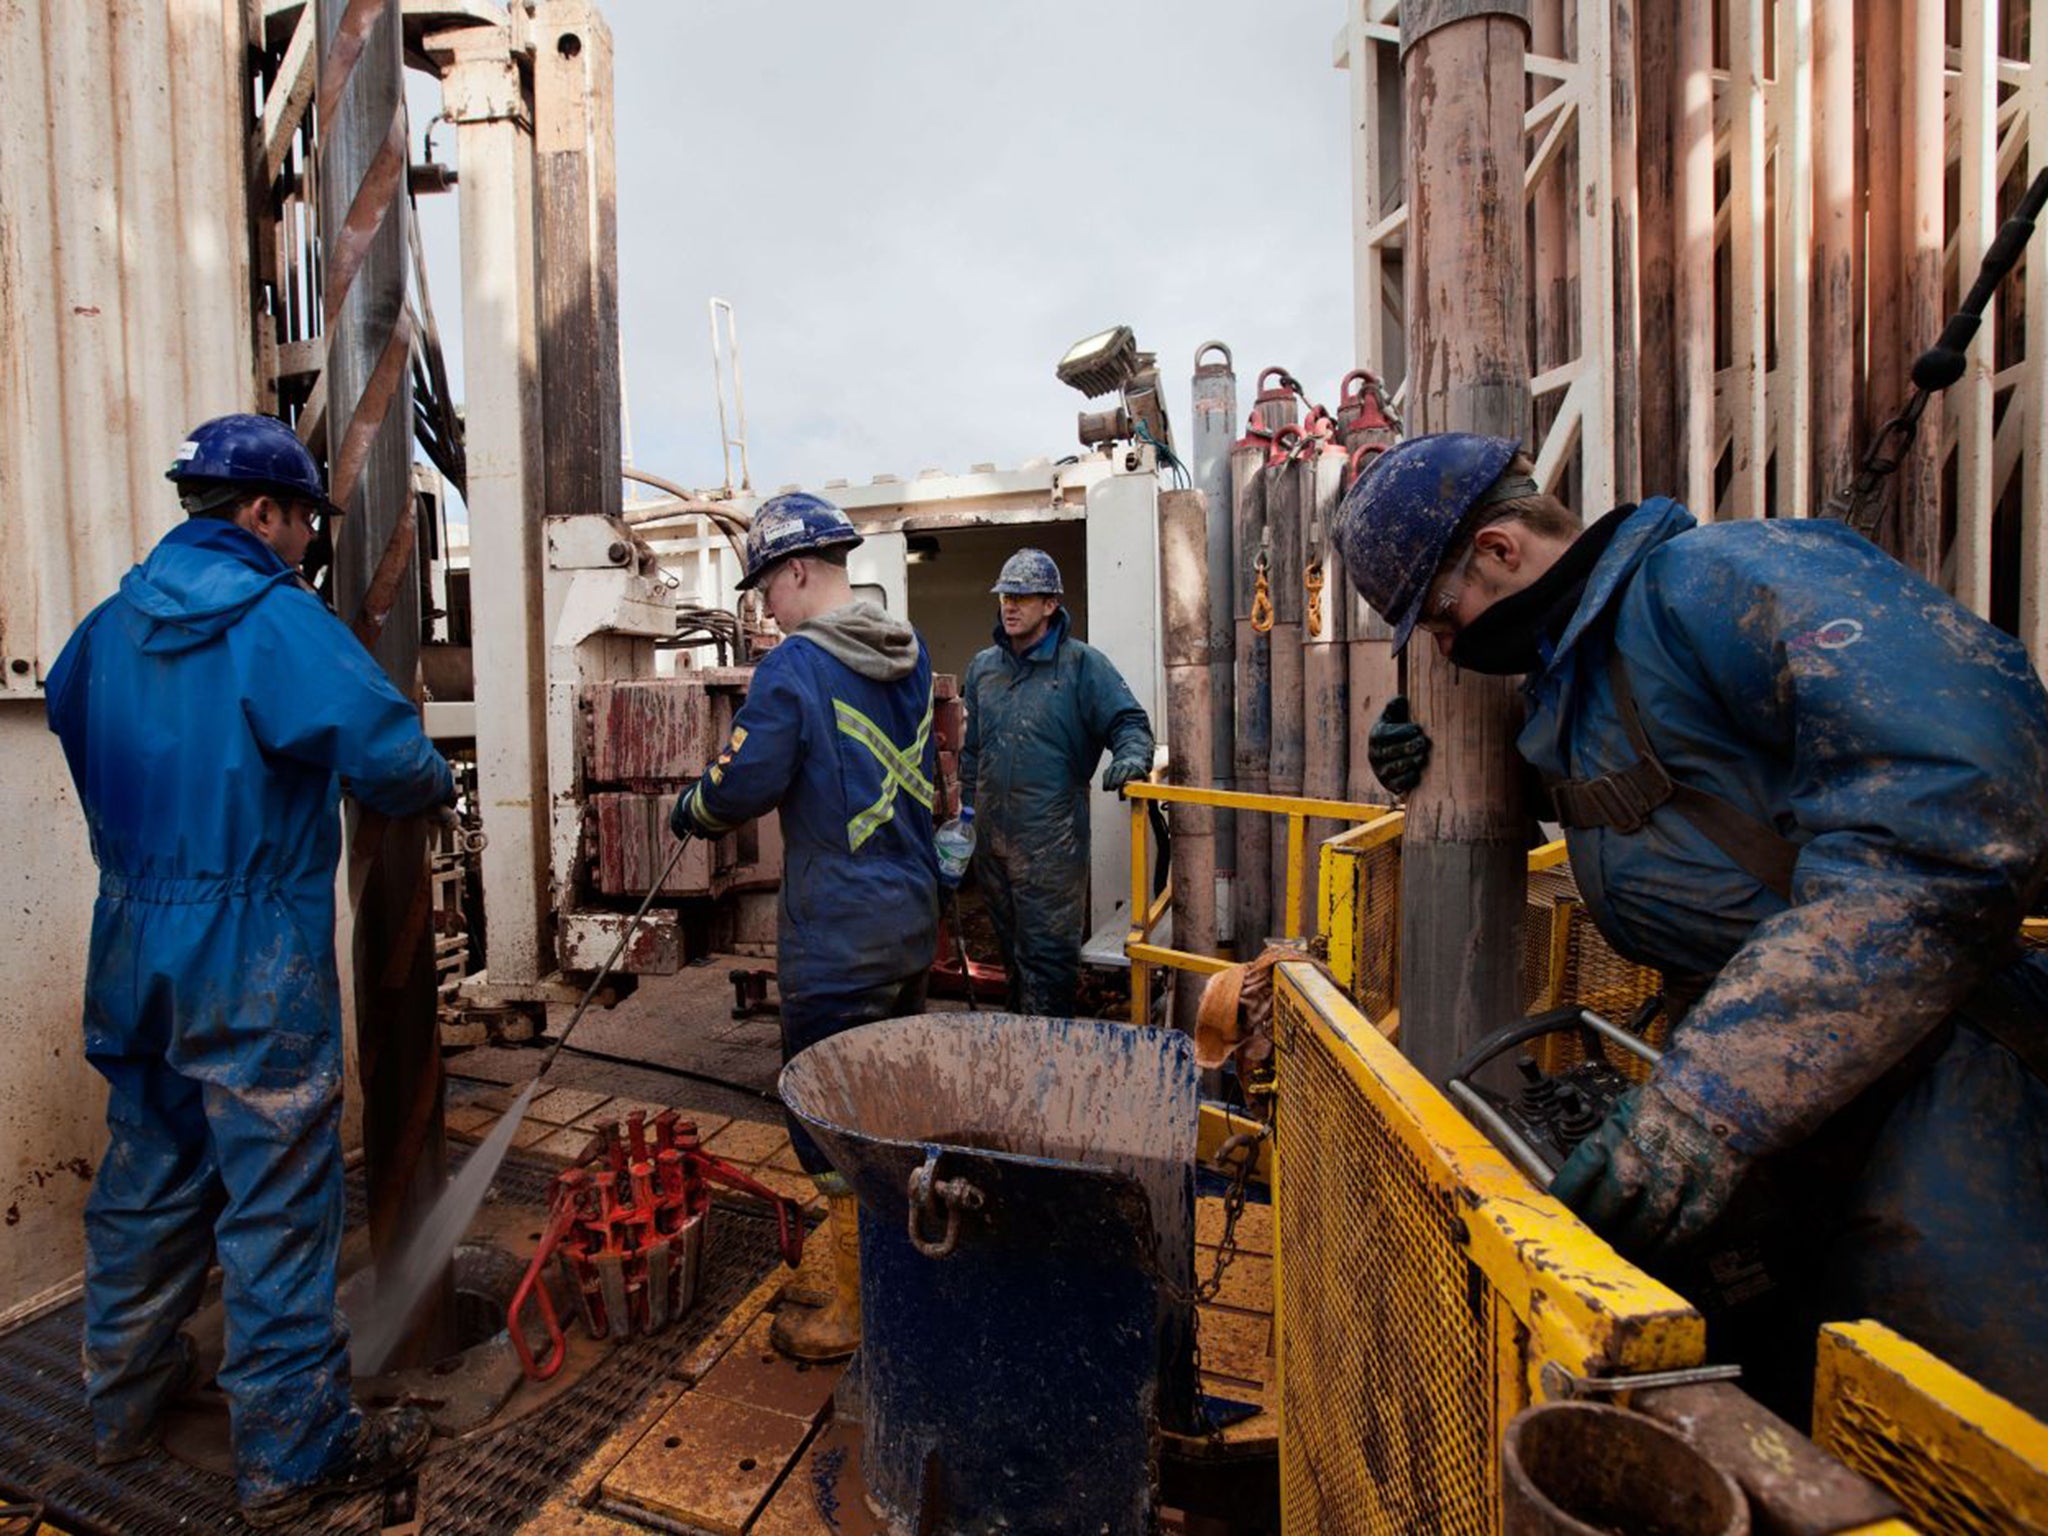 Engineers on a drilling platform extracting fossil fuels